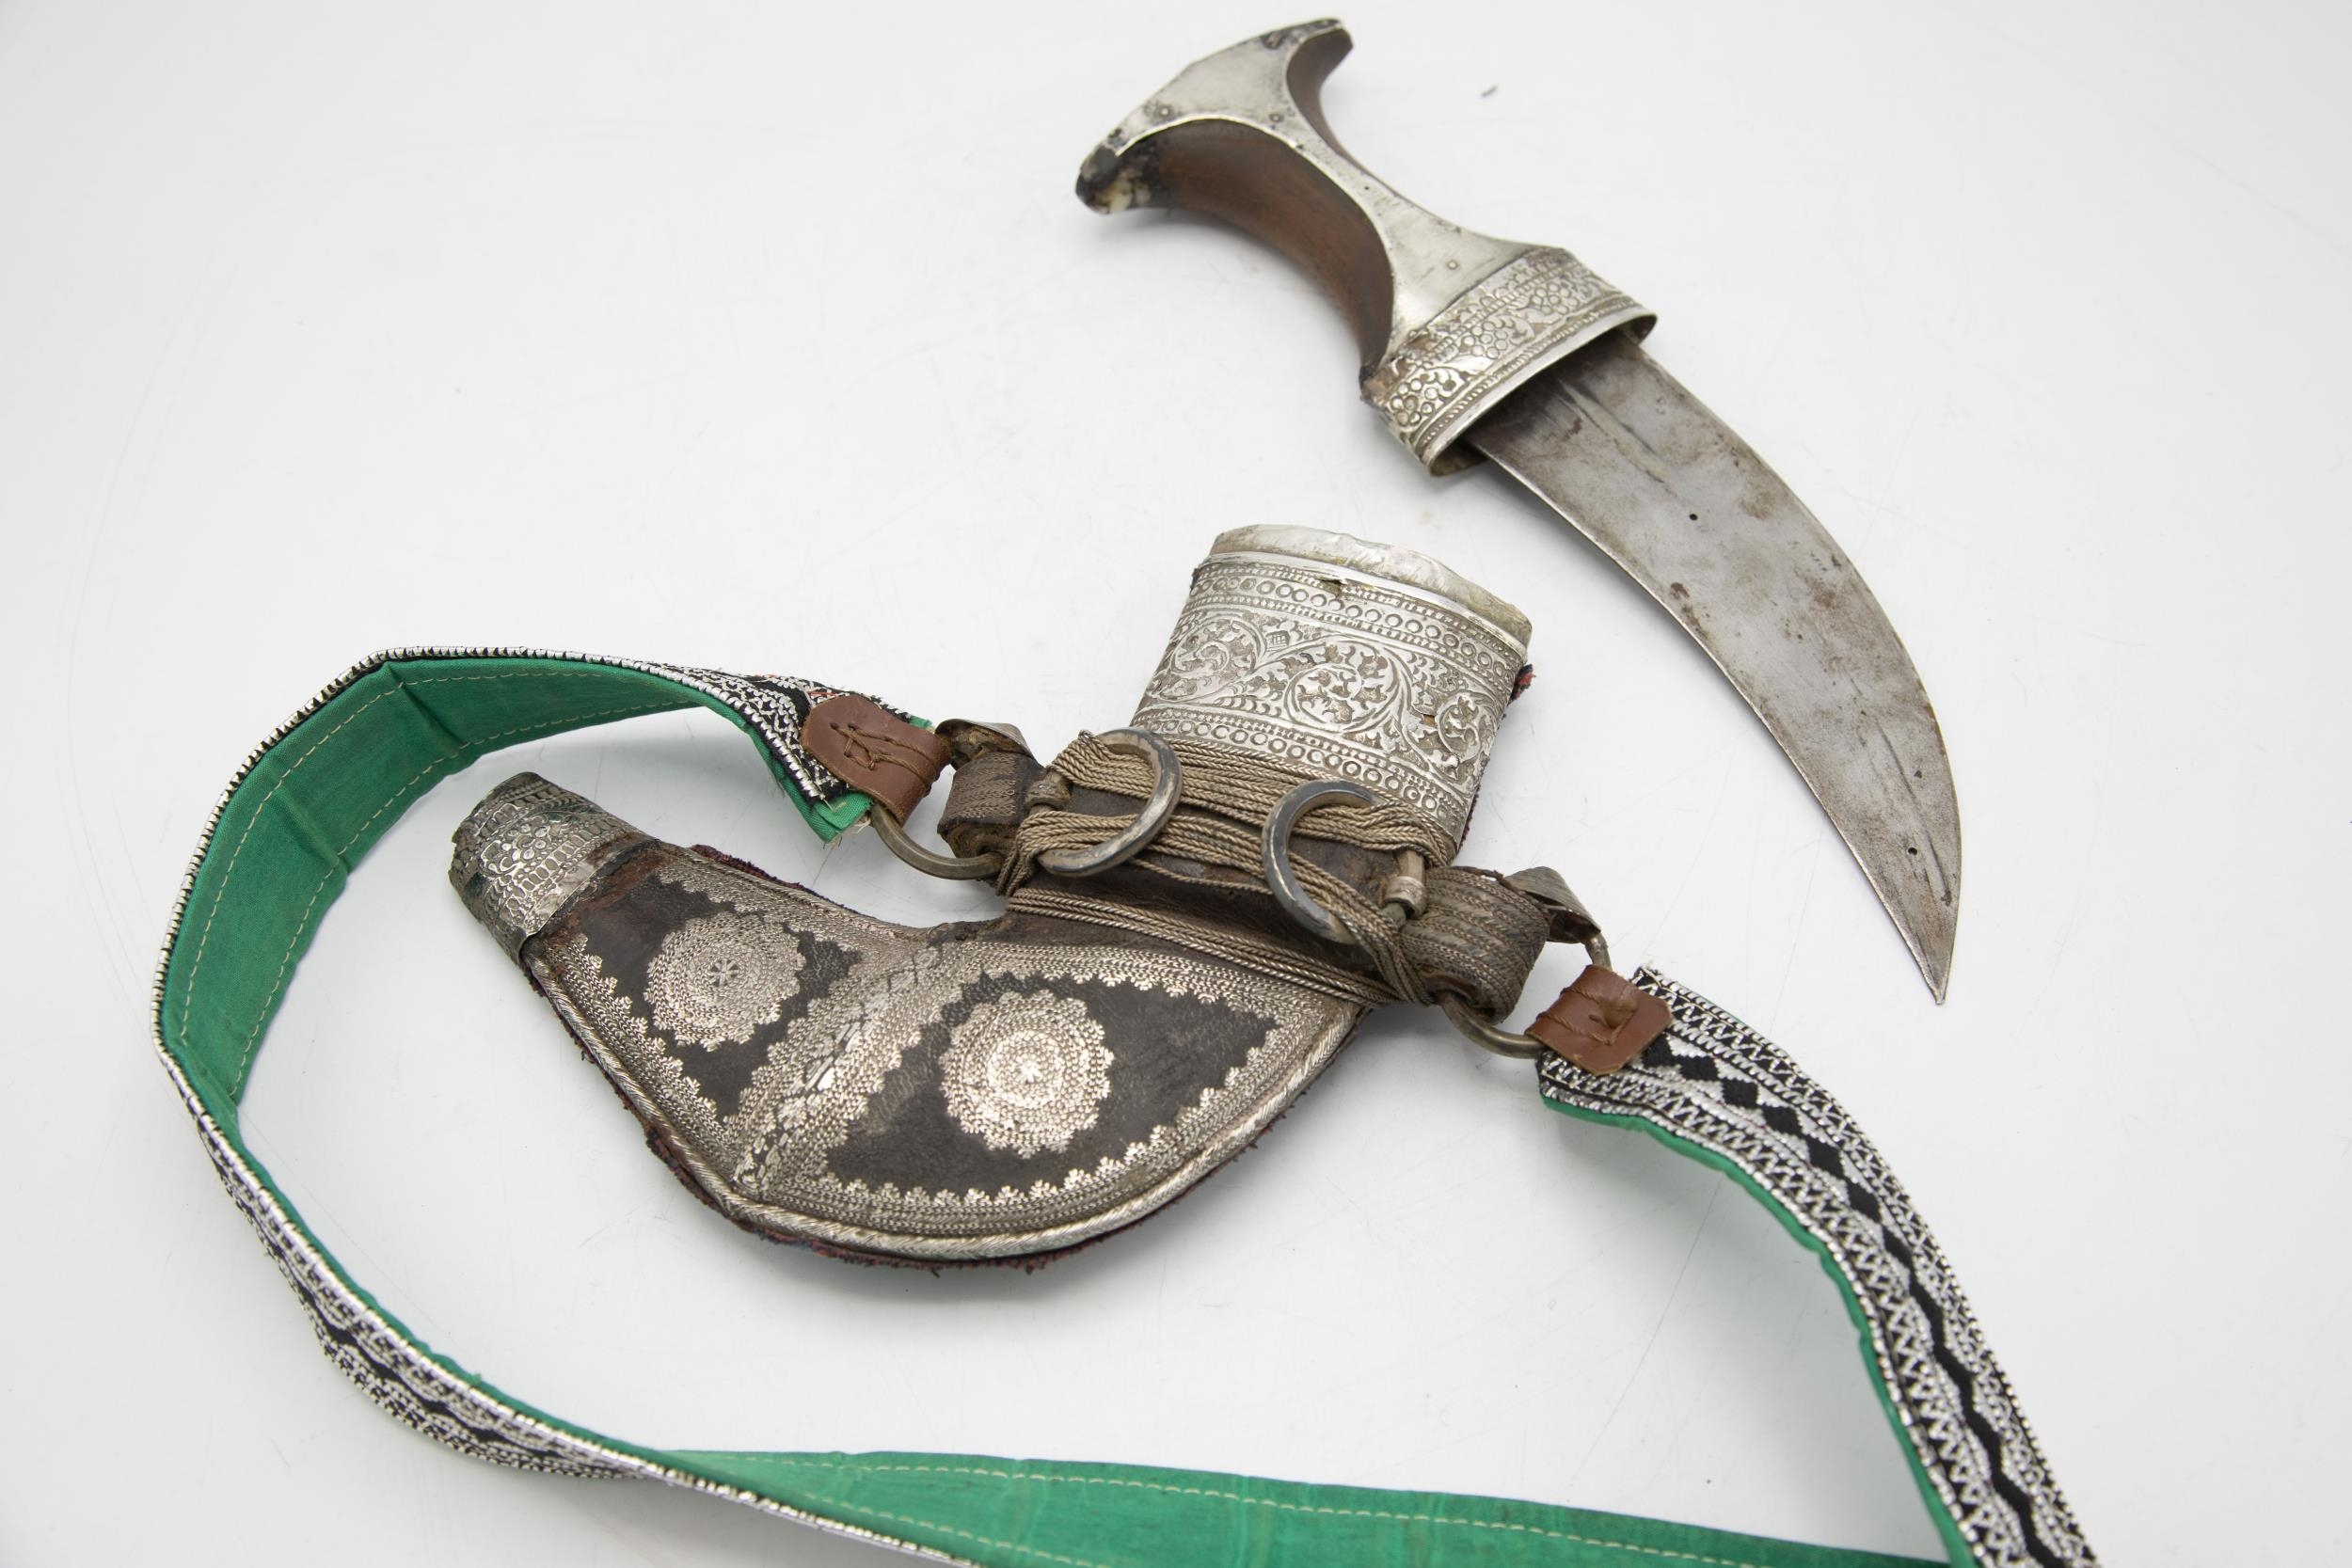 Turn of the century Persian Ottoman Jambiya dagger and belt in a goof silver sheath and silver - Image 2 of 3